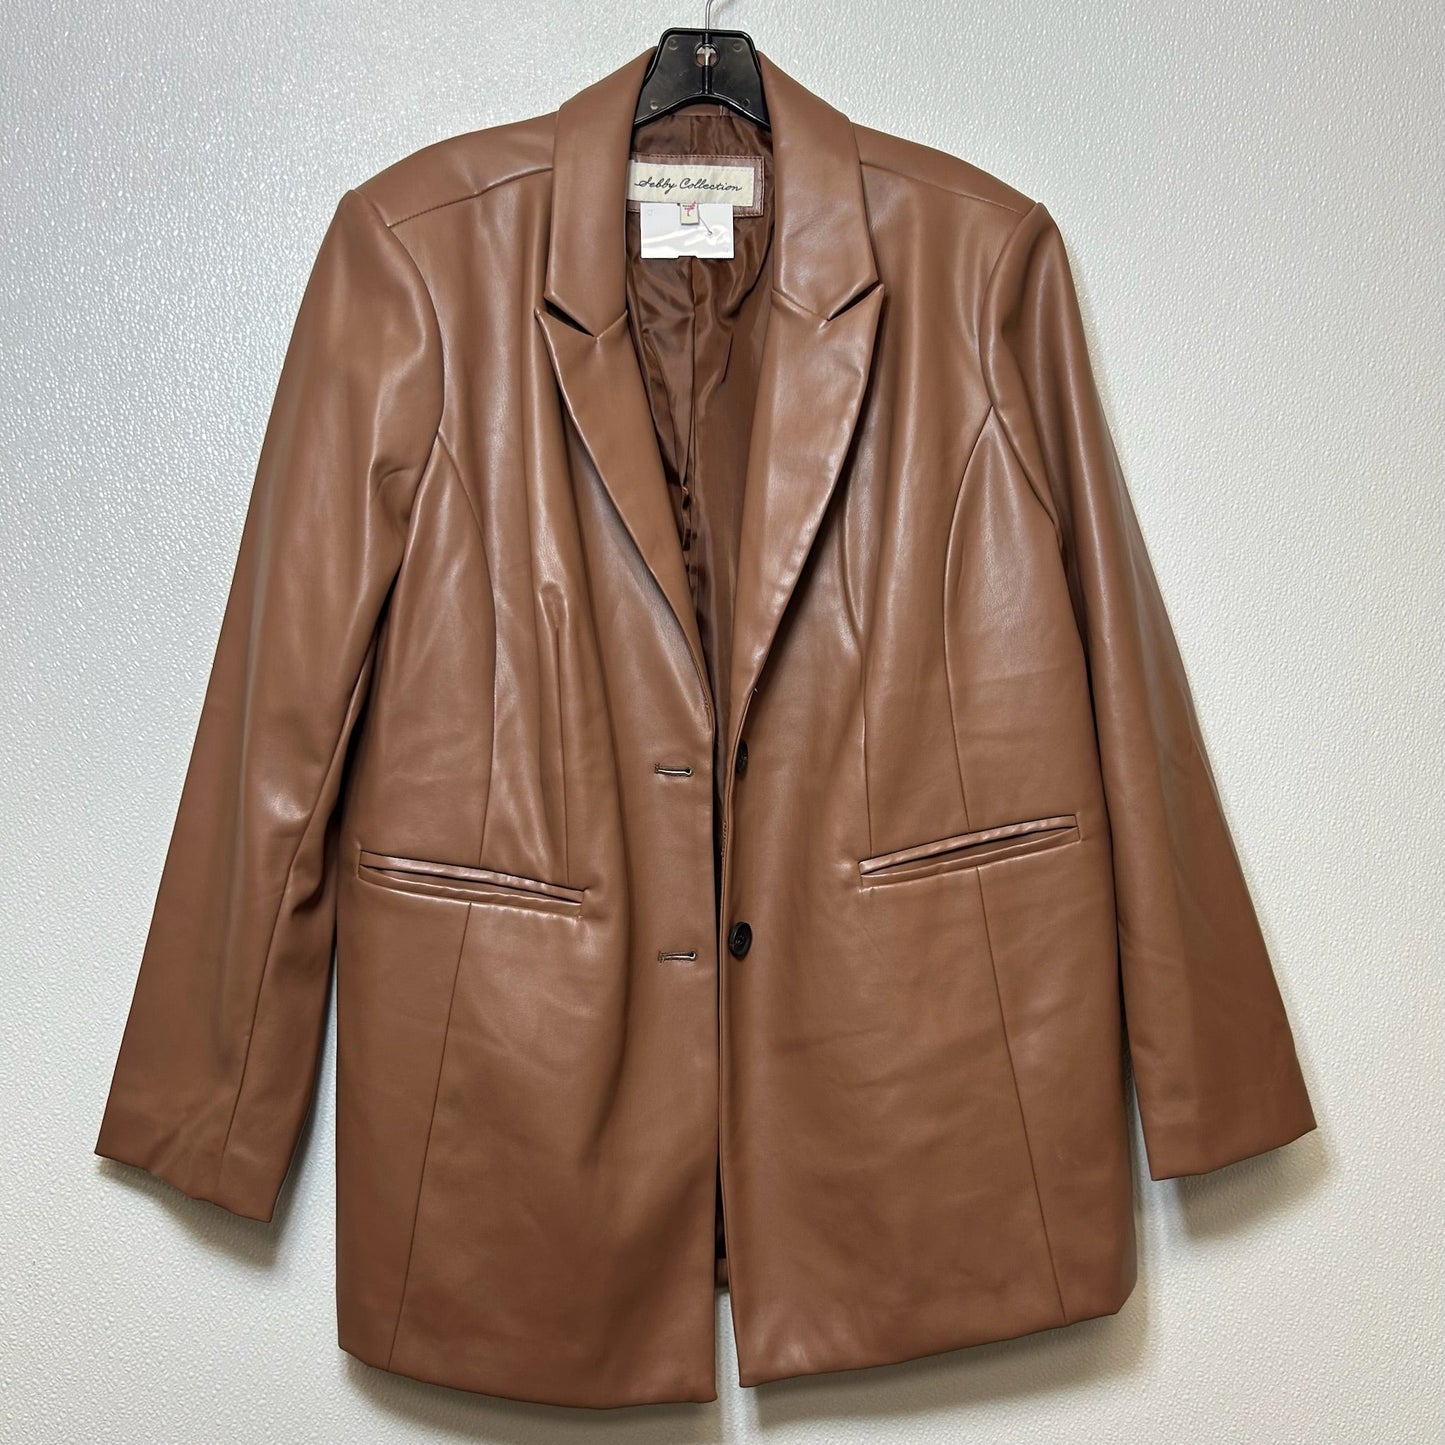 Chocolate Coat Other SEBBY COLLECTION, Size L